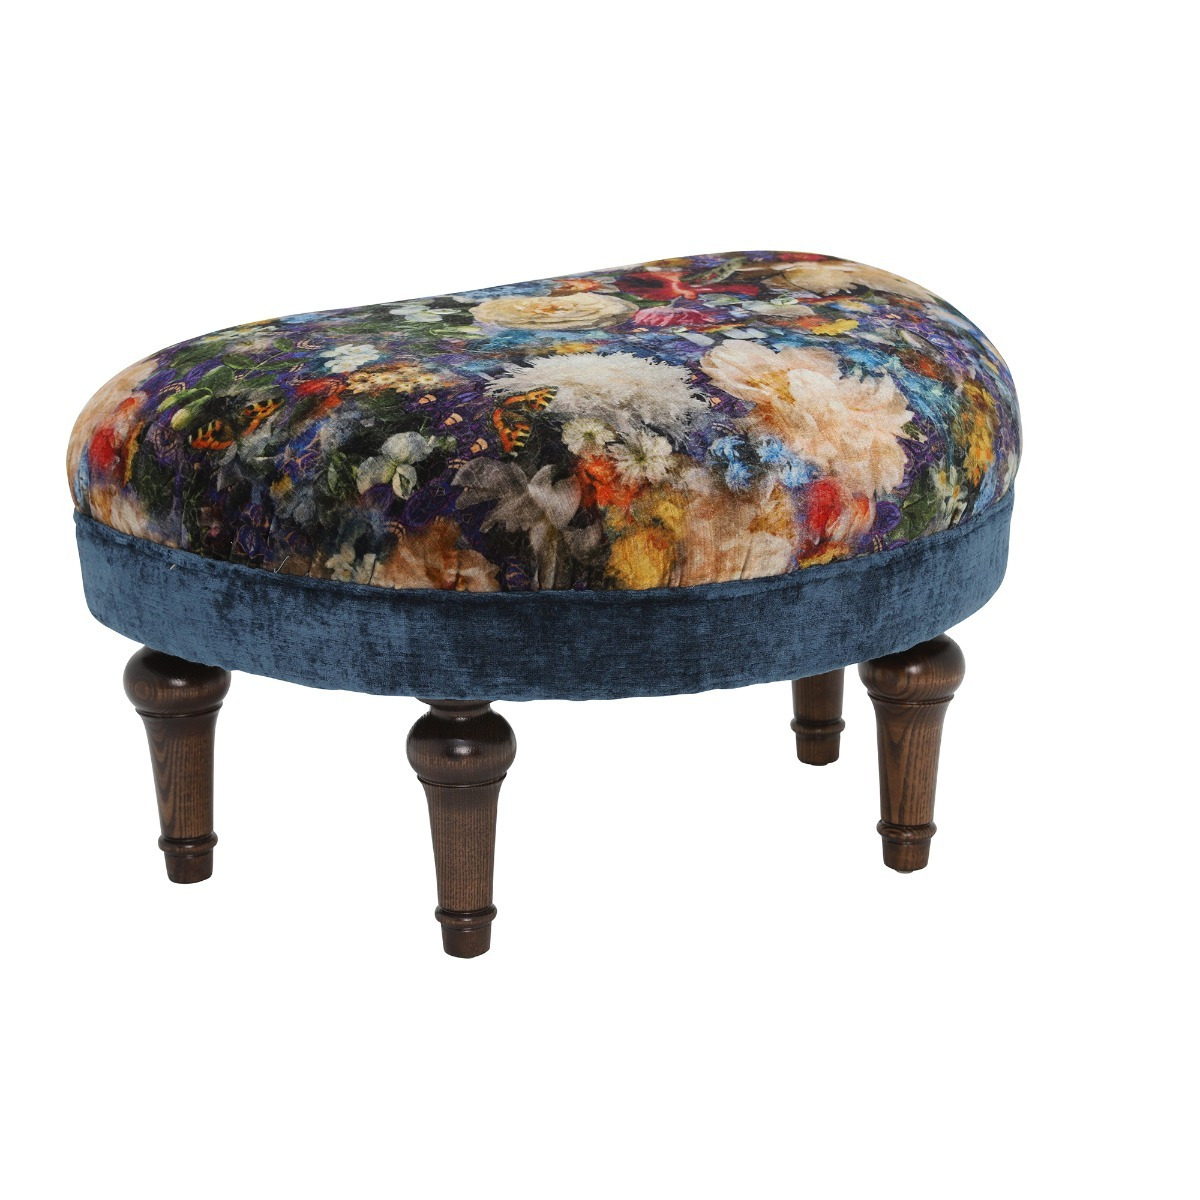 Marchmont Small Stool, Blue Fabric - Barker & Stonehouse - image 1